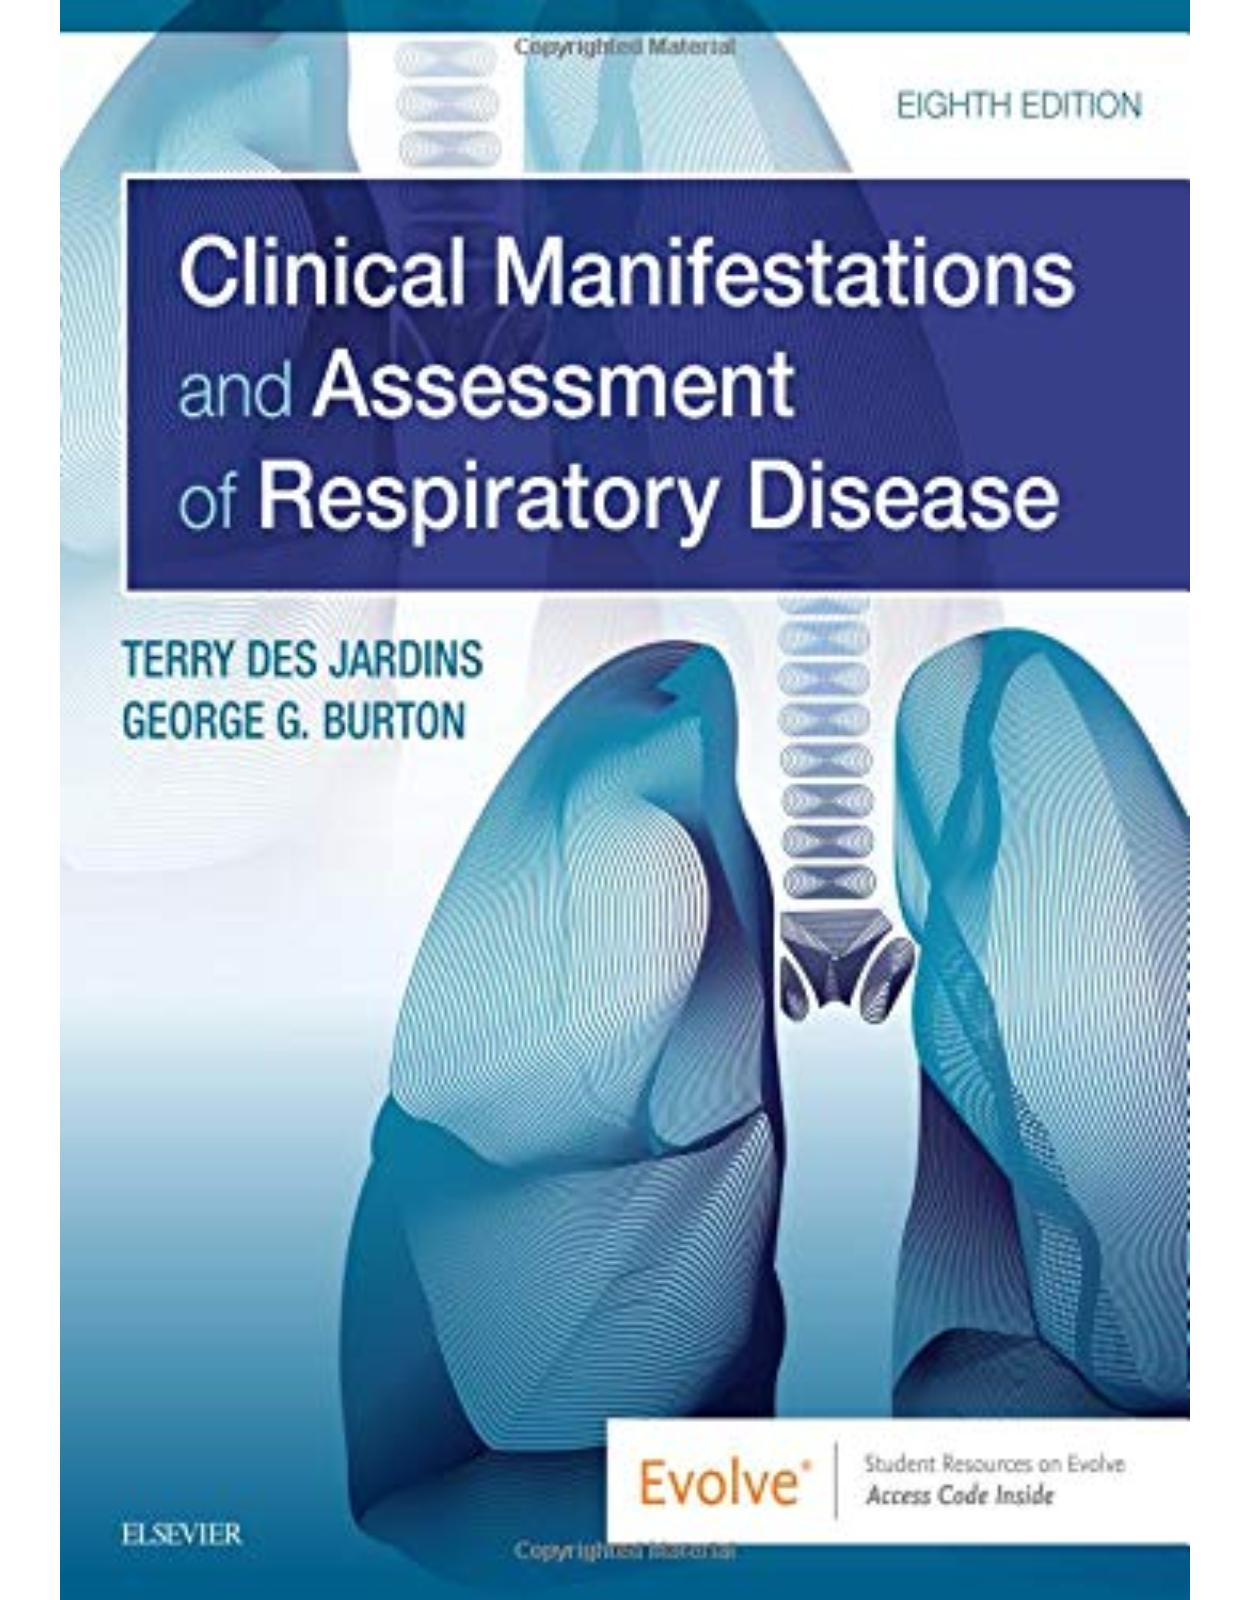 Clinical Manifestations and Assessment of Respiratory Disease, 8e